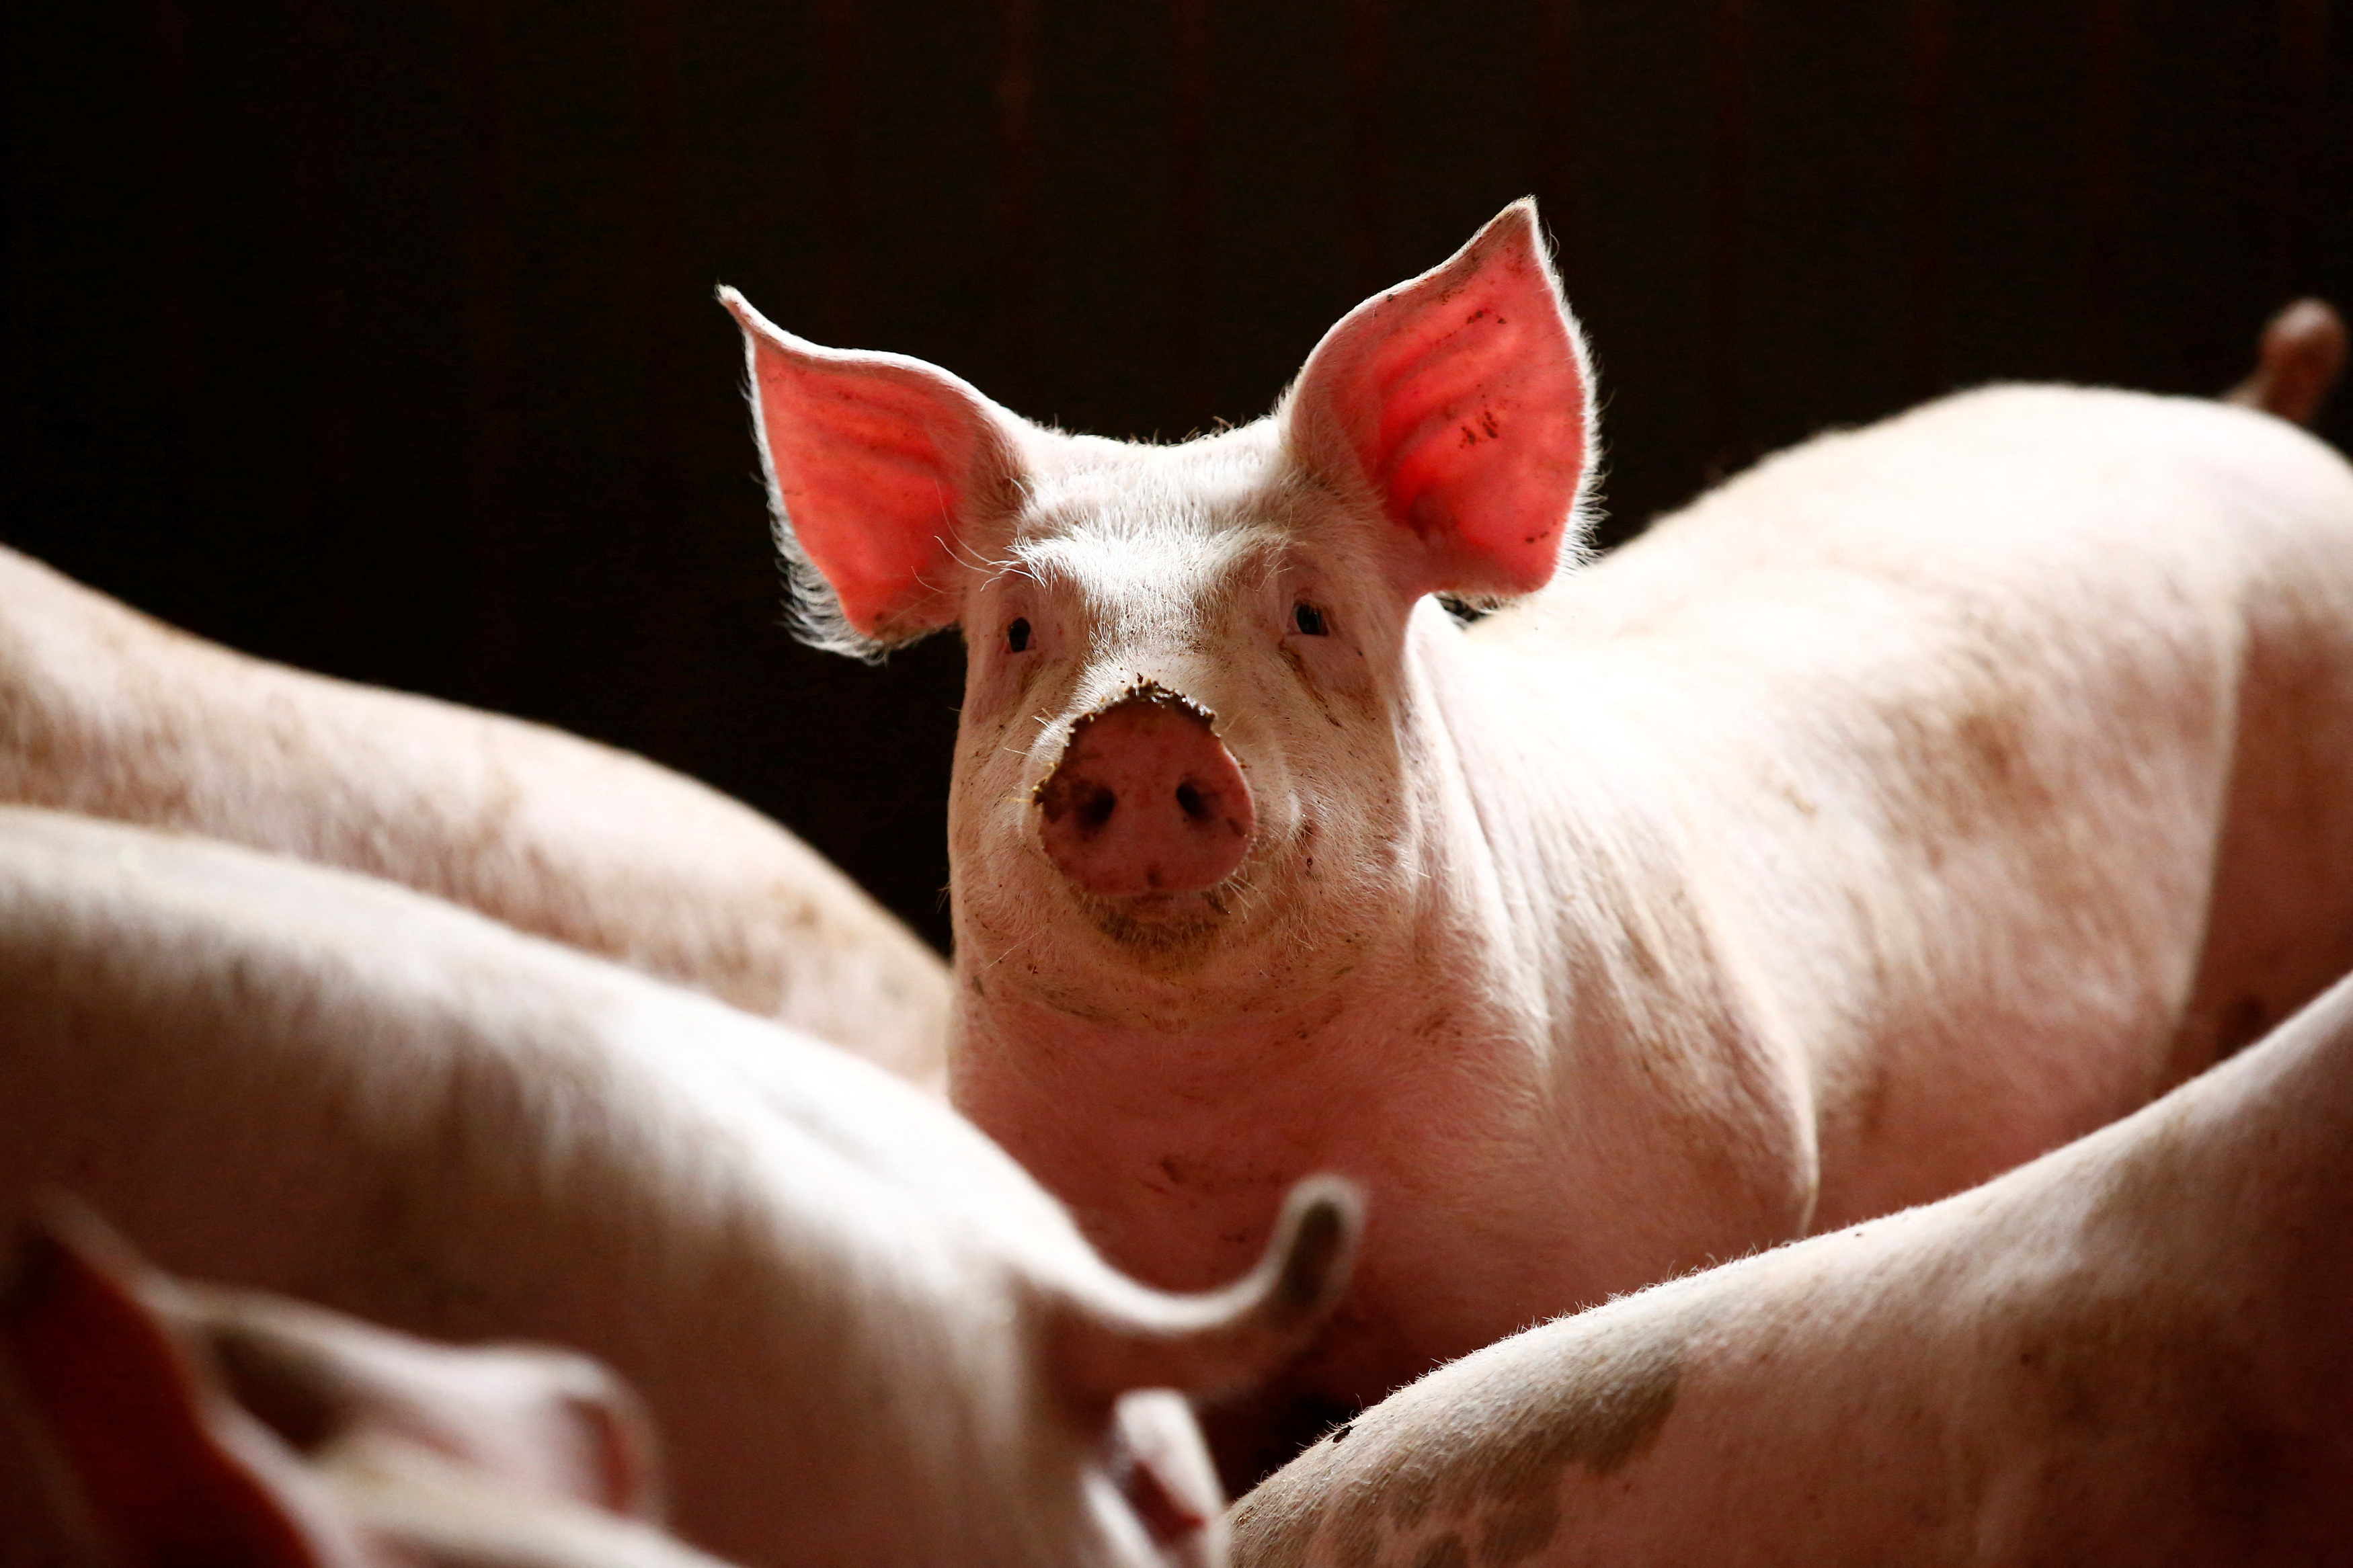 Pigs are seen in a piggery at a village near Warsaw